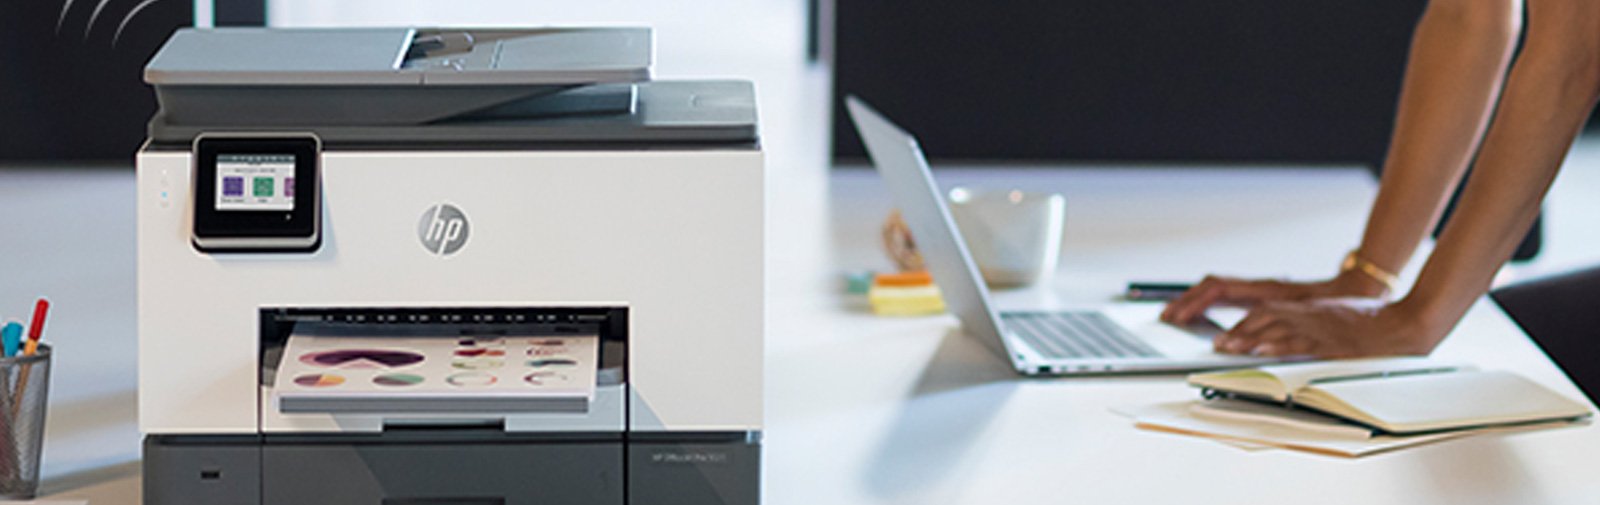 How to Add a Printer to a Laptop in an Office